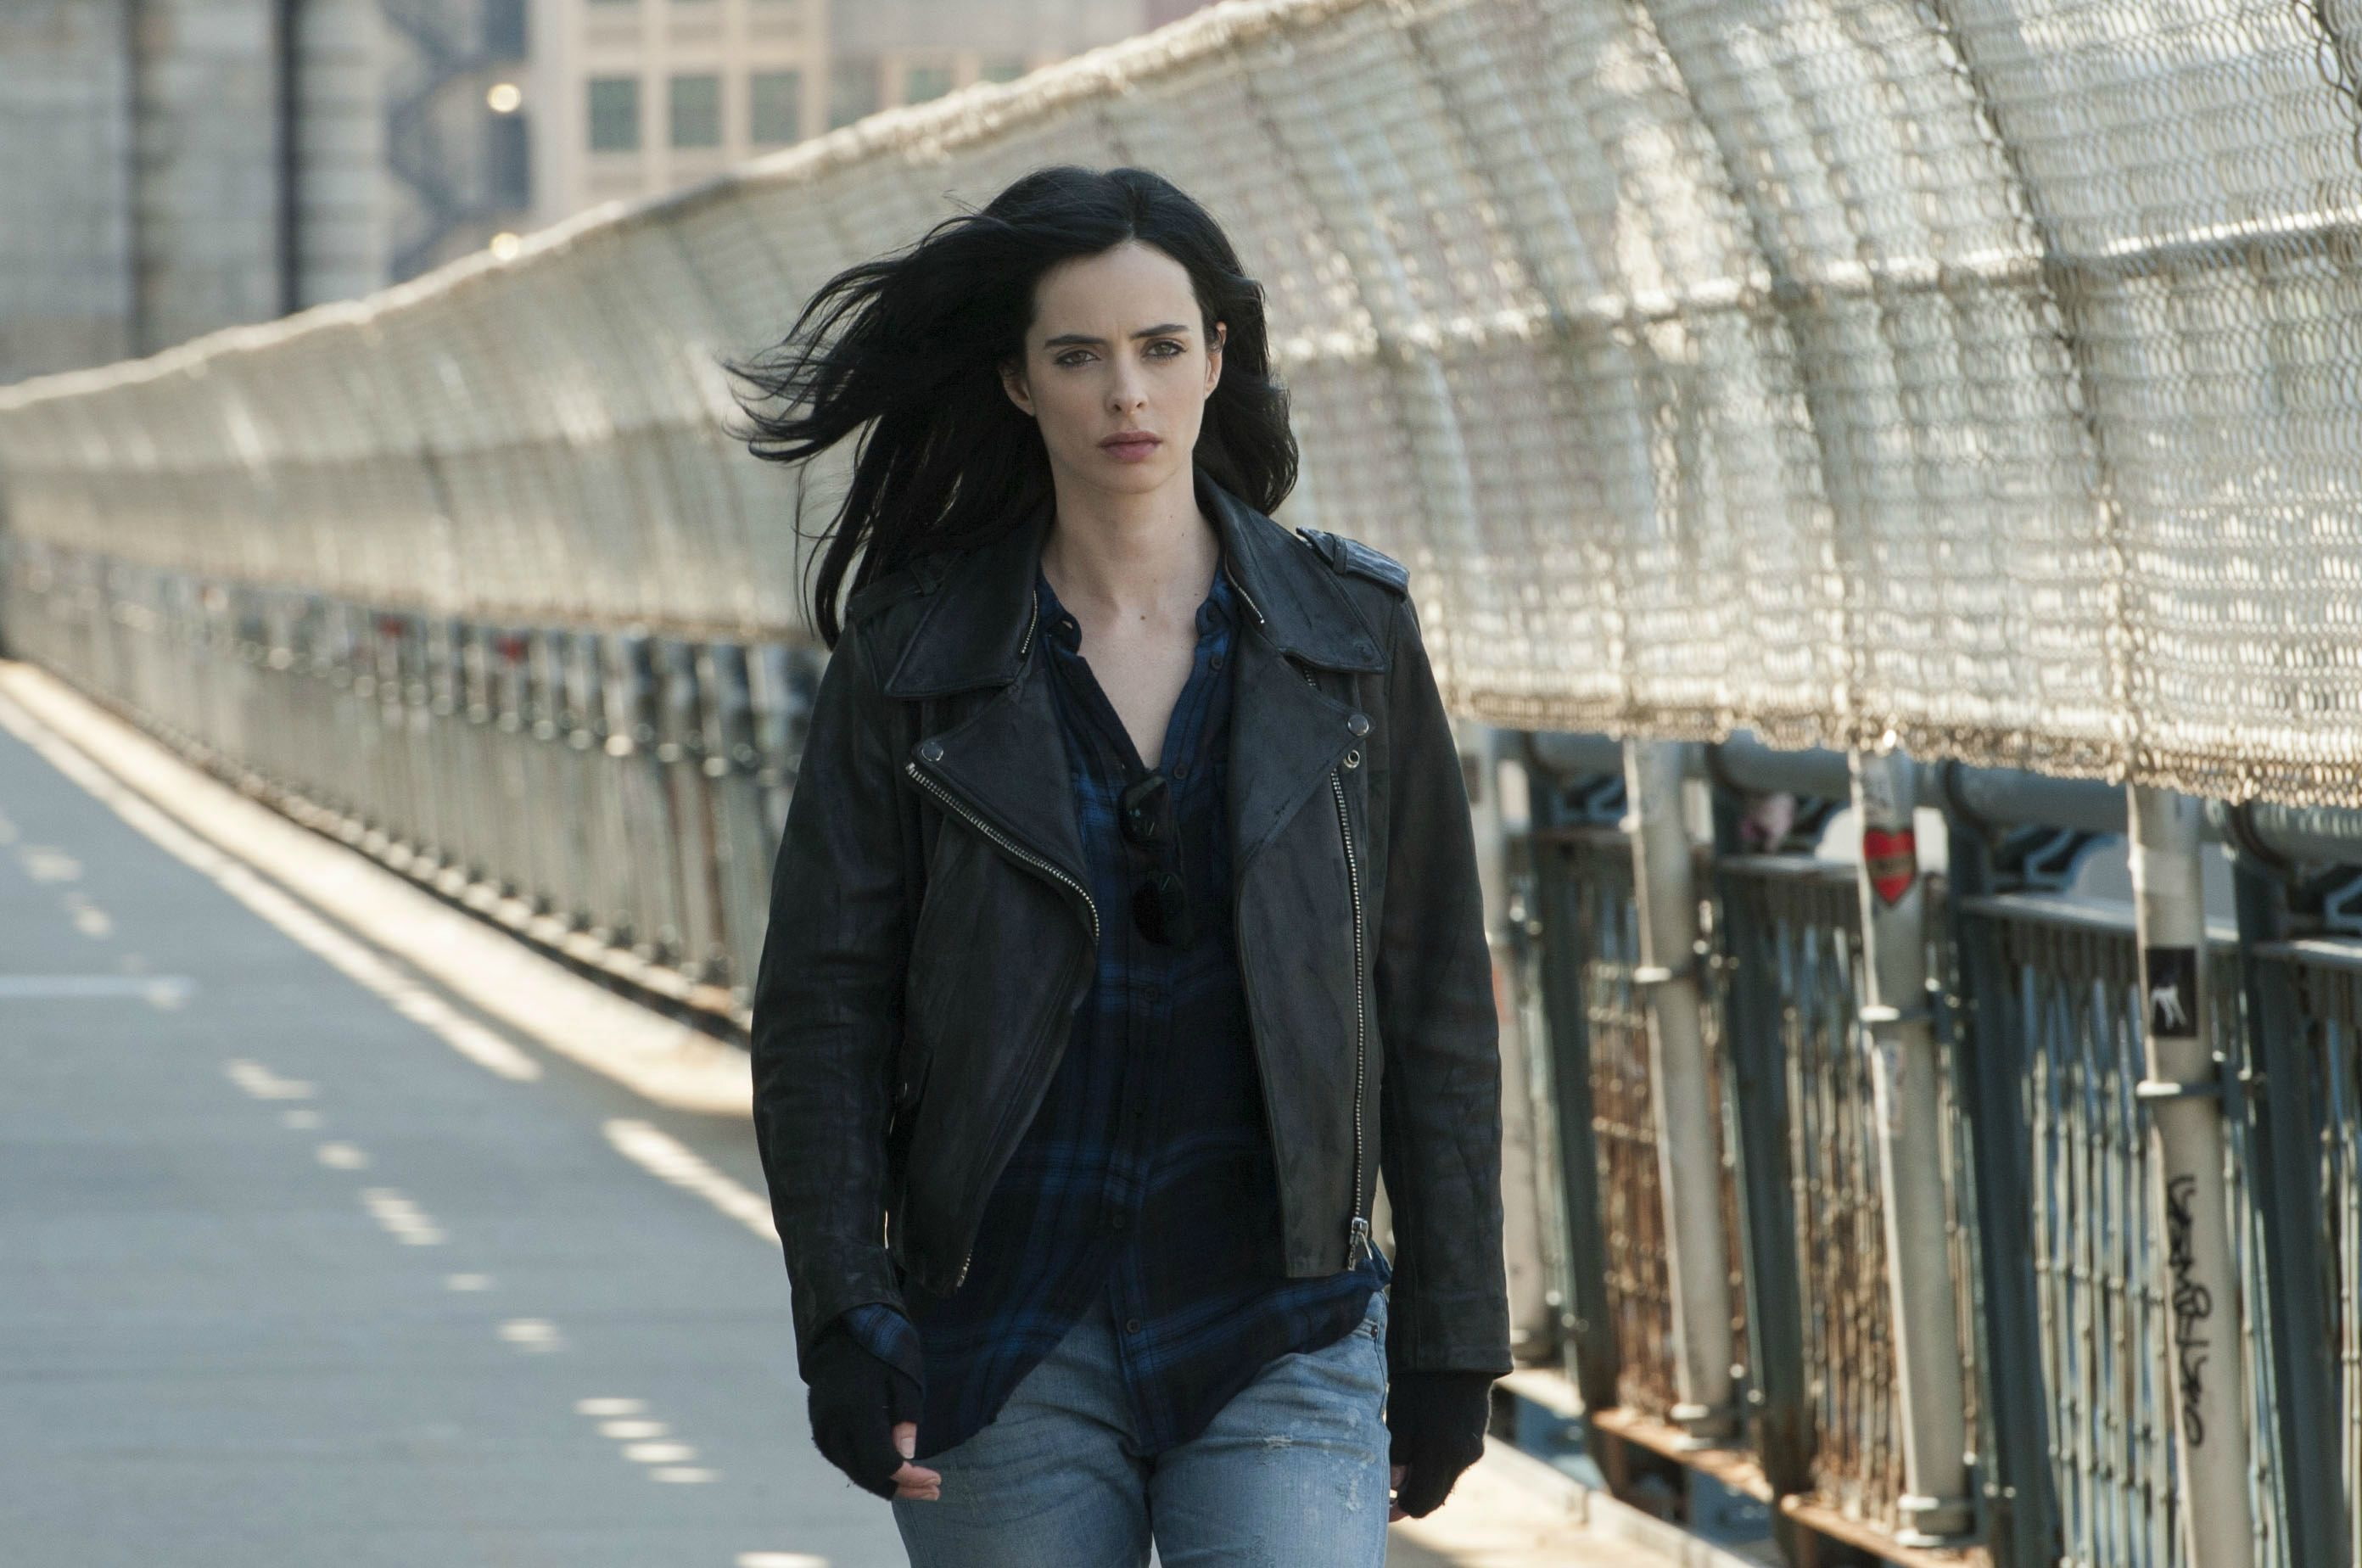 jessica jones, krysten ritter, tv shows, young adult, one person